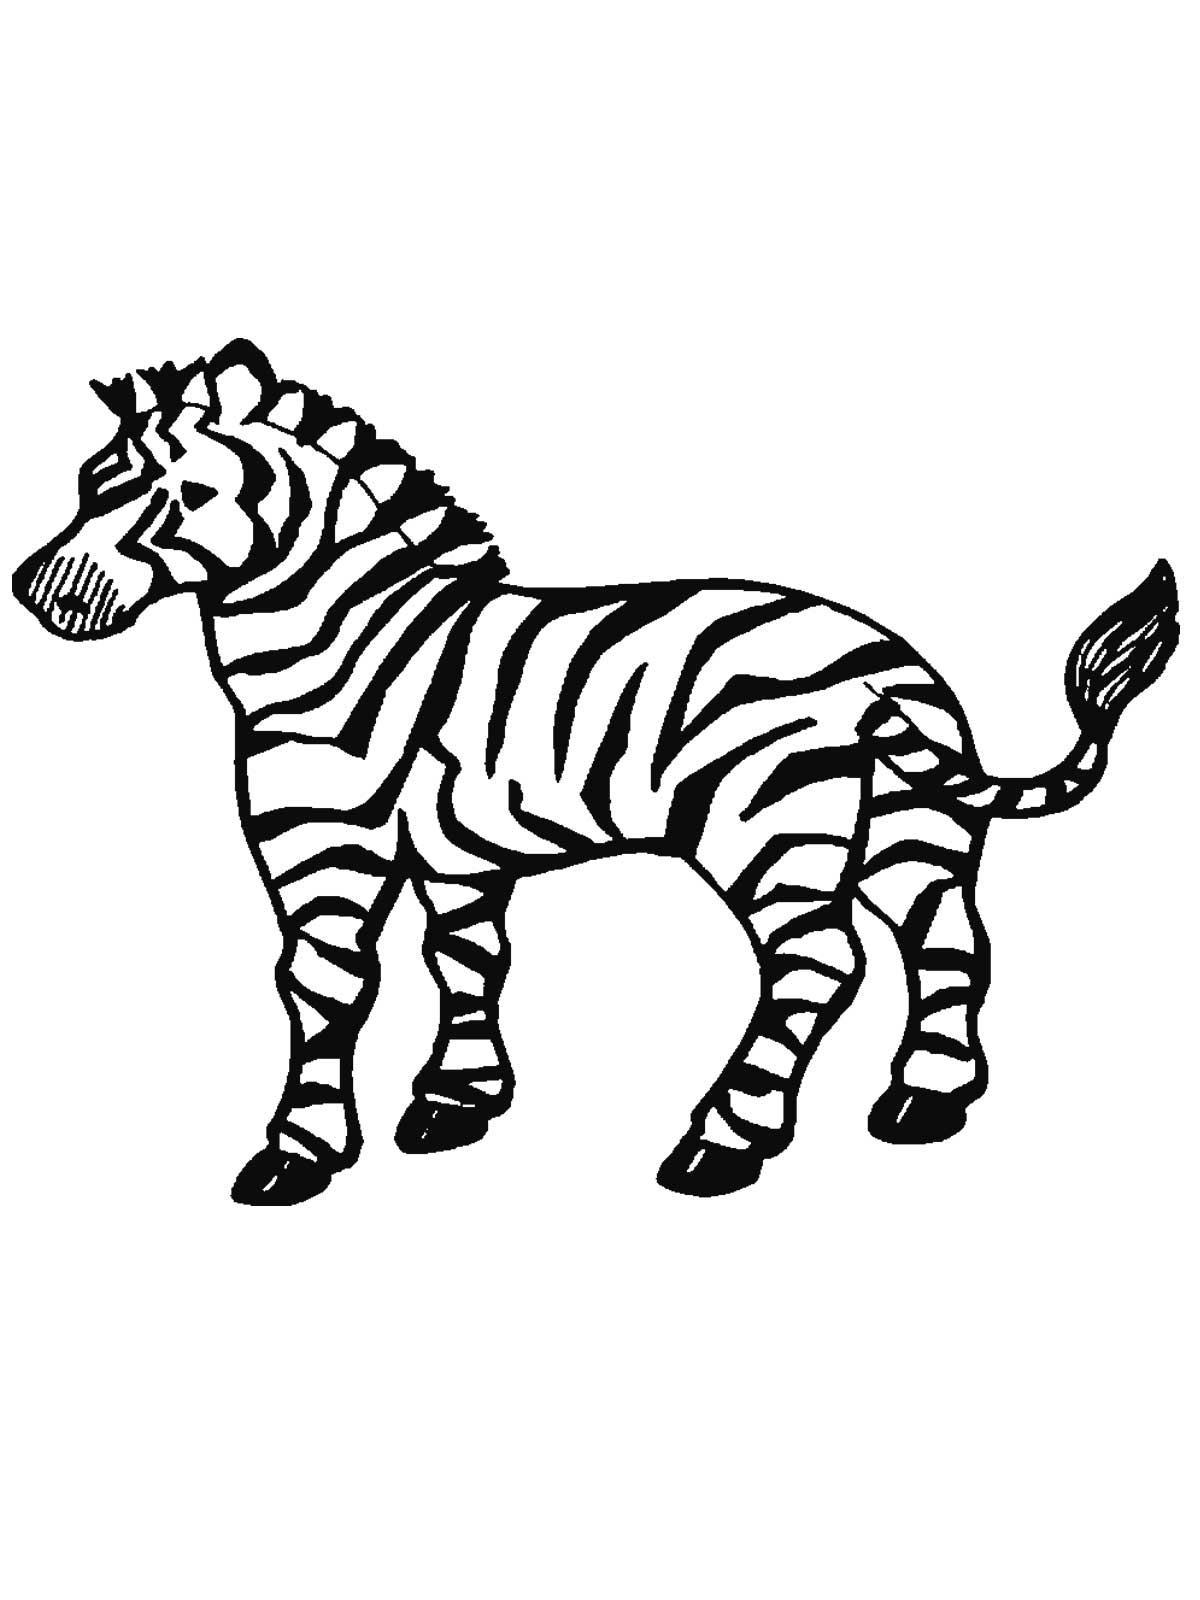 Coloring Page Of A Zebra Free Printable Zebra Coloring Pages For Kids 